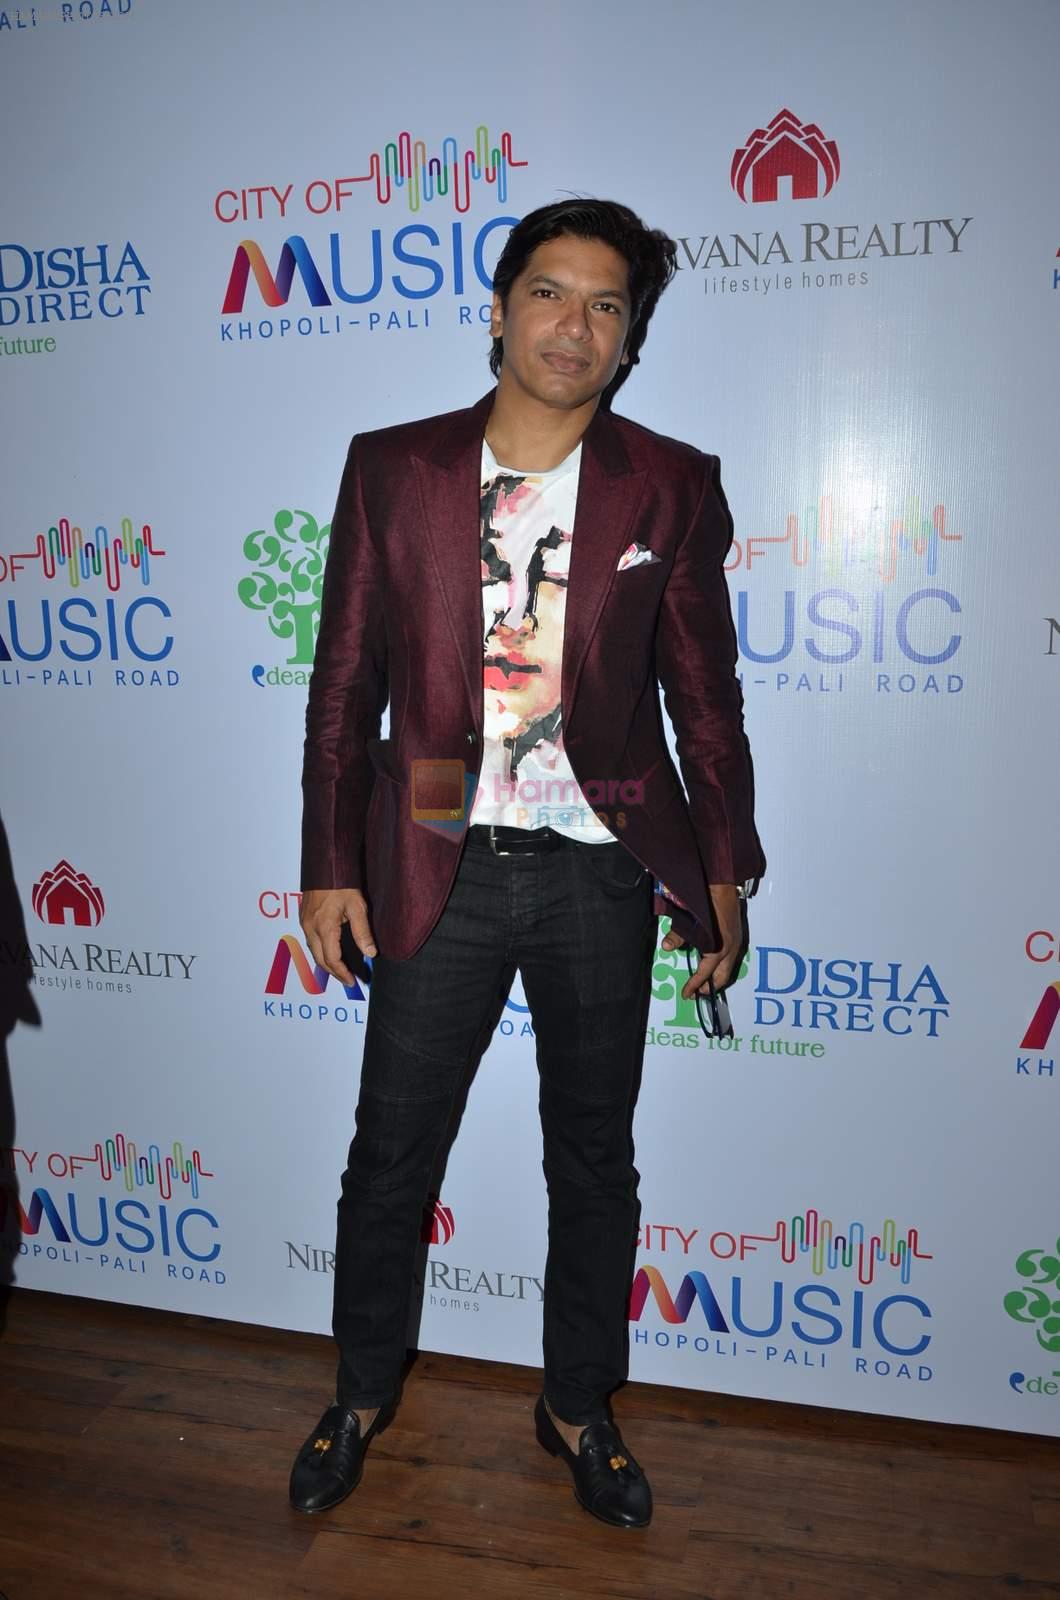 Shaan at Nirvana Realty & Disha Direct's launch of India's first music-inspired township, City of Music on 12th Aug 2015